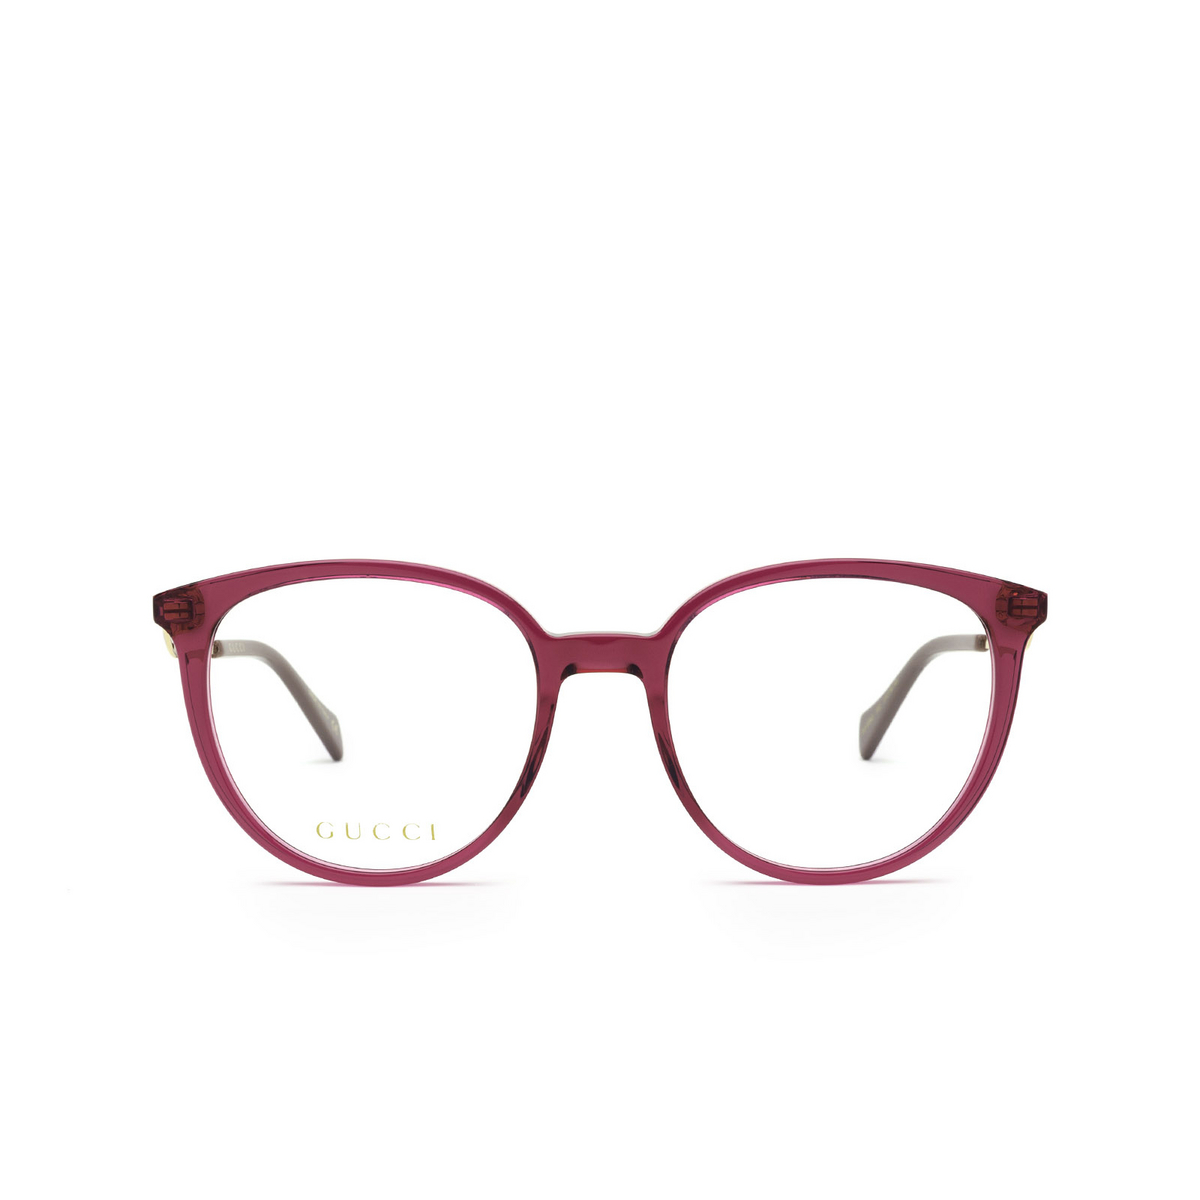 Gucci® Round Eyeglasses: GG1008O color Pink 002 - front view.